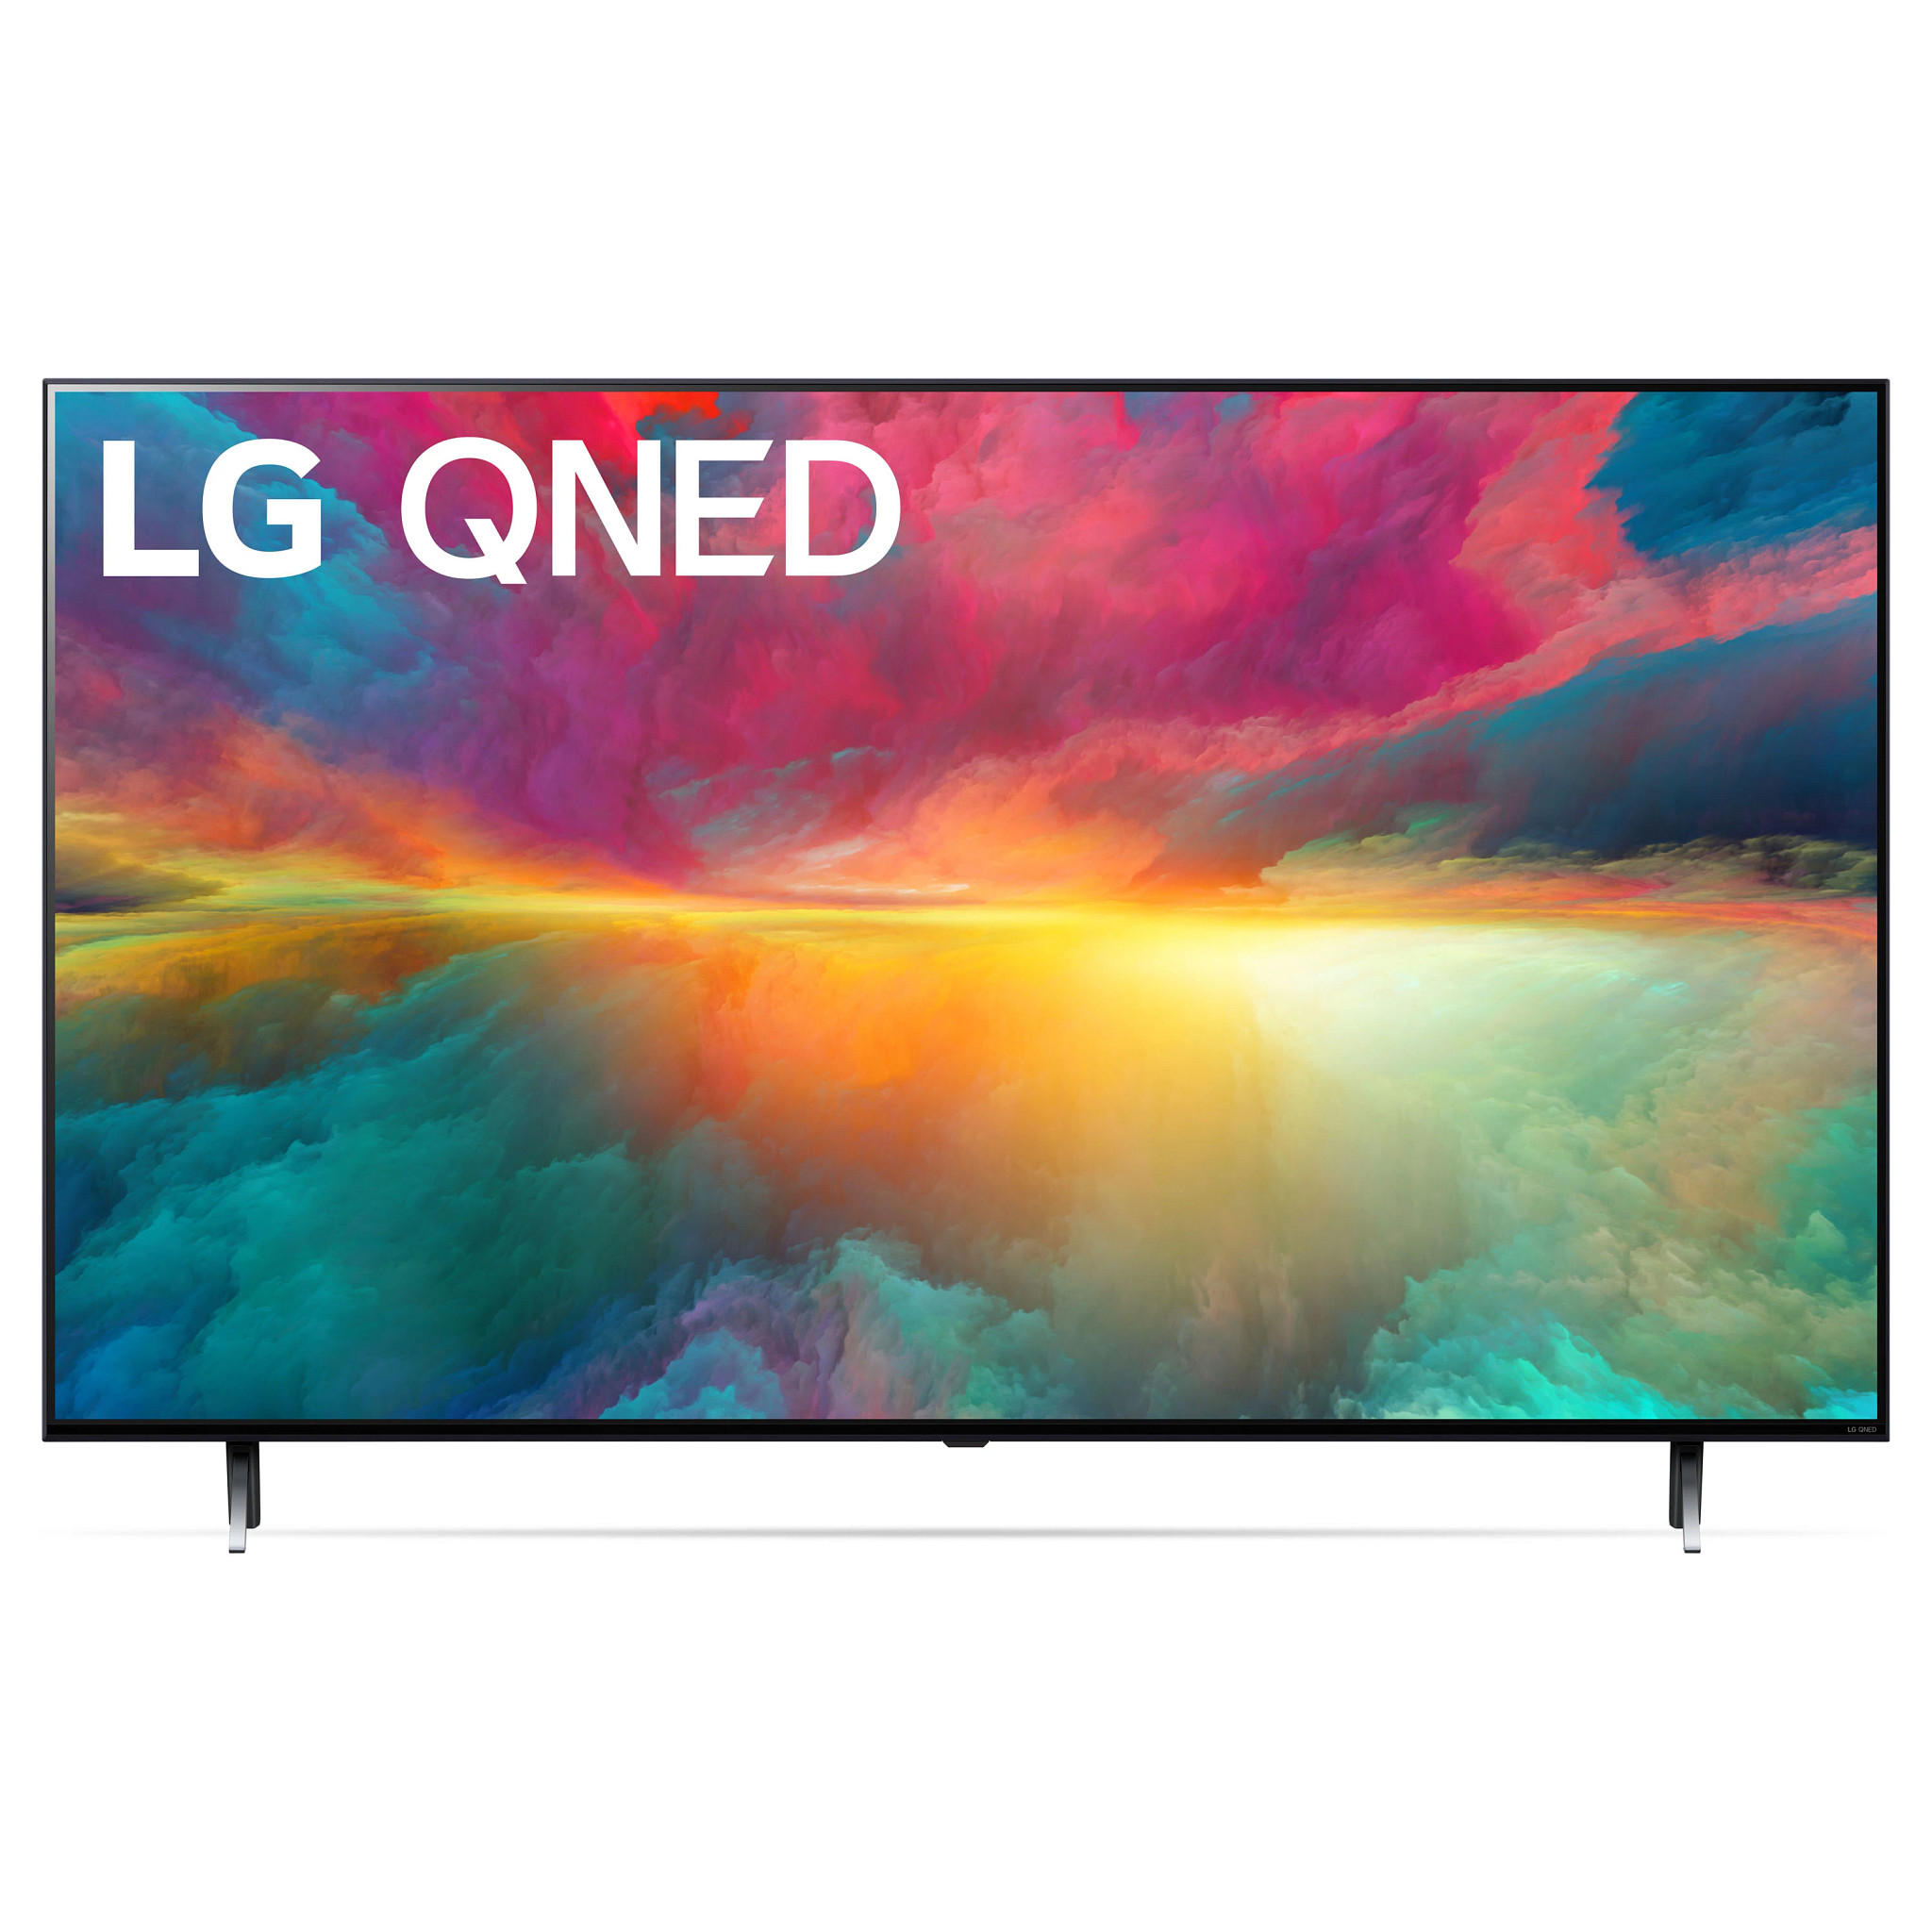 LG 55" Class 4K UHD QNED Web OS Smart TV with HDR 75 Series (55QNED75URA) - image 1 of 7